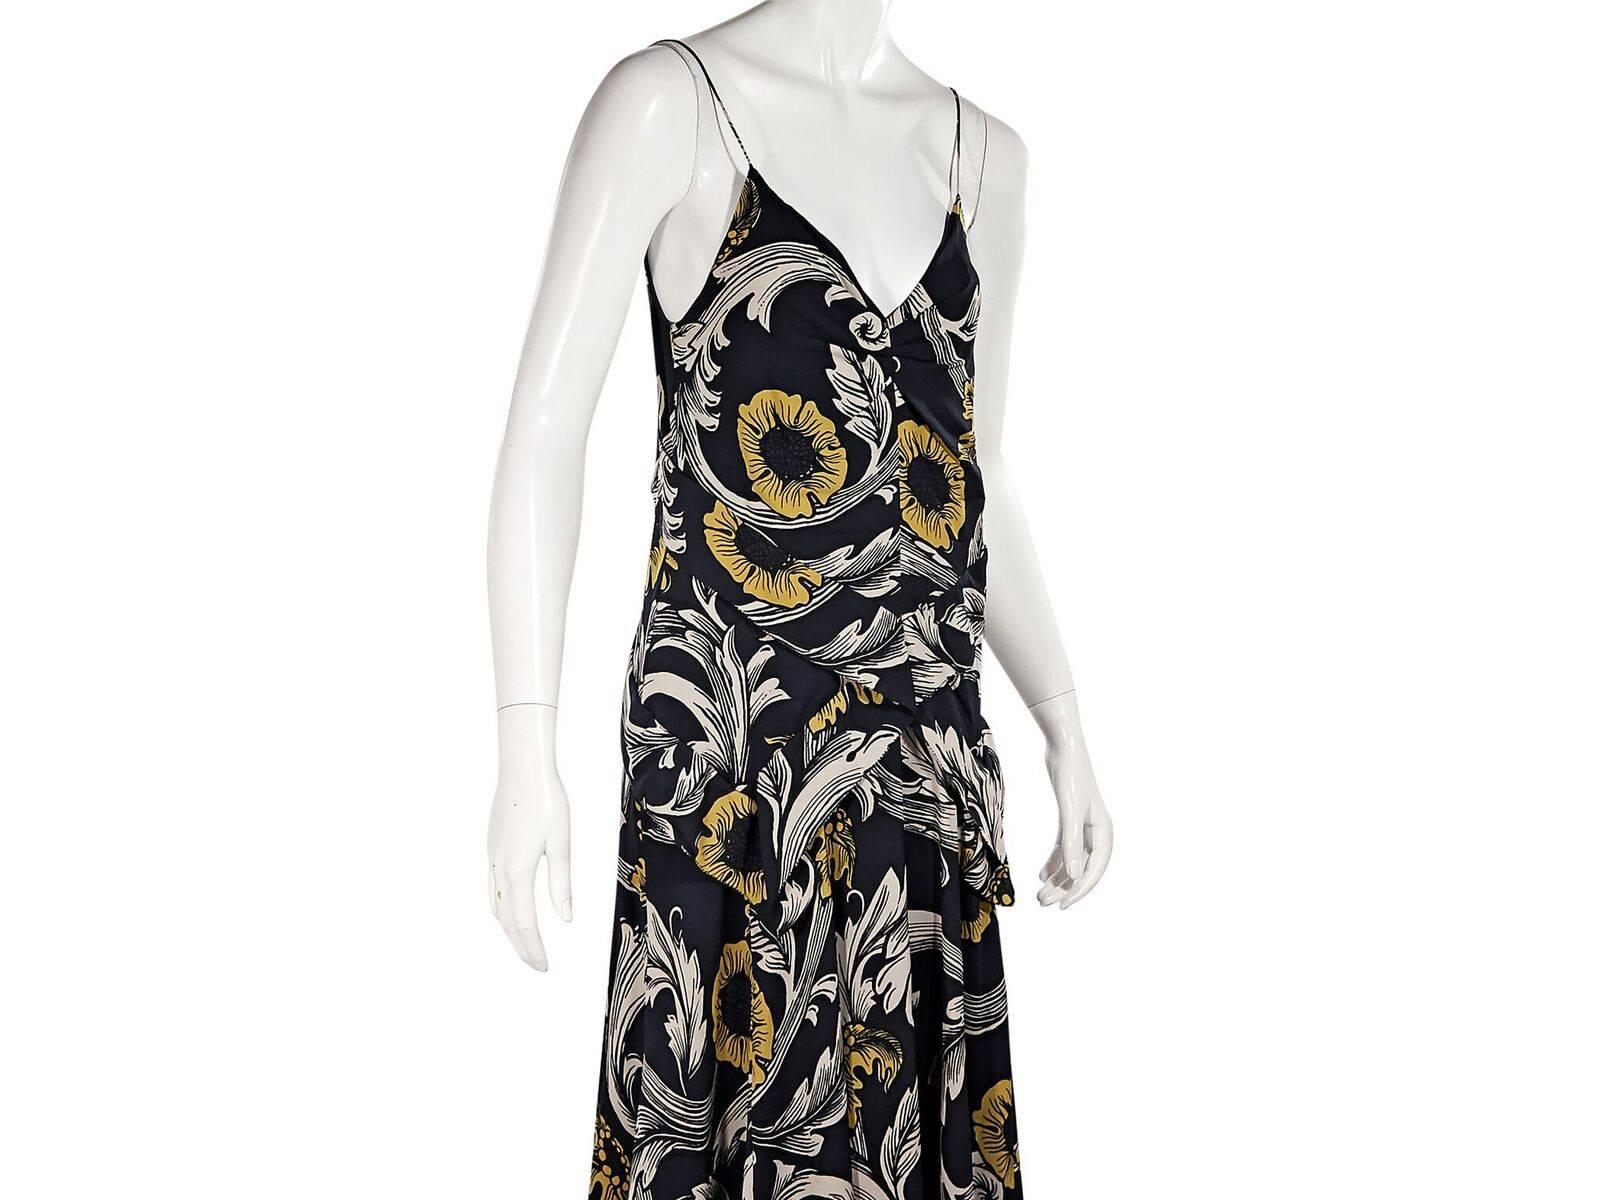 Burberry Prorsum Multicolor Floral-Printed Dress In Good Condition In New York, NY